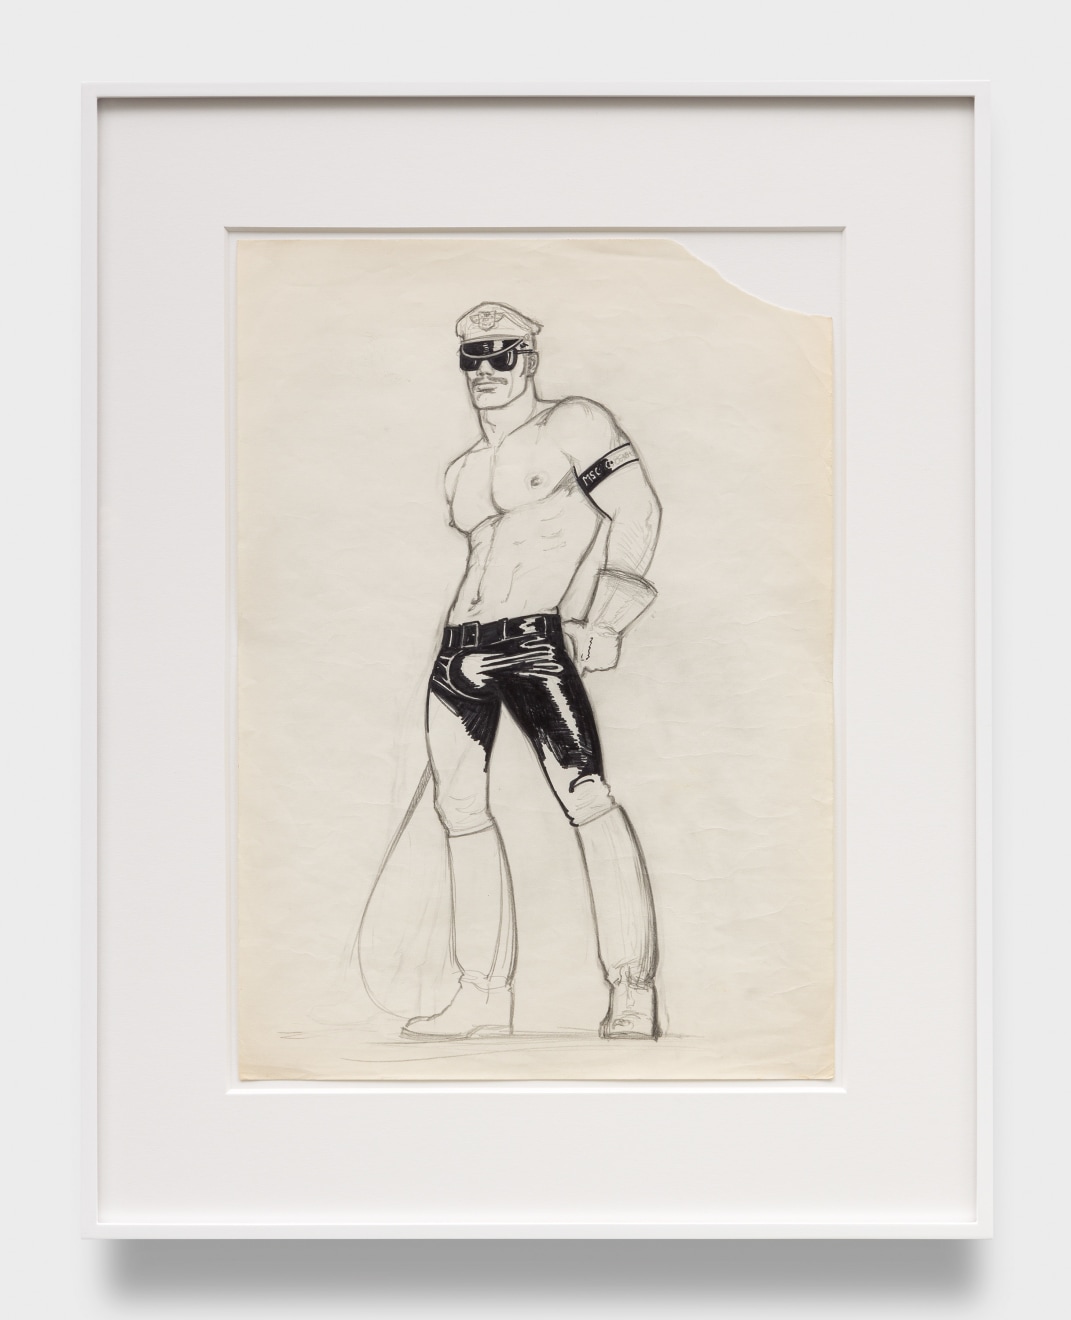 Tom of Finland, Untitled, c. 1982